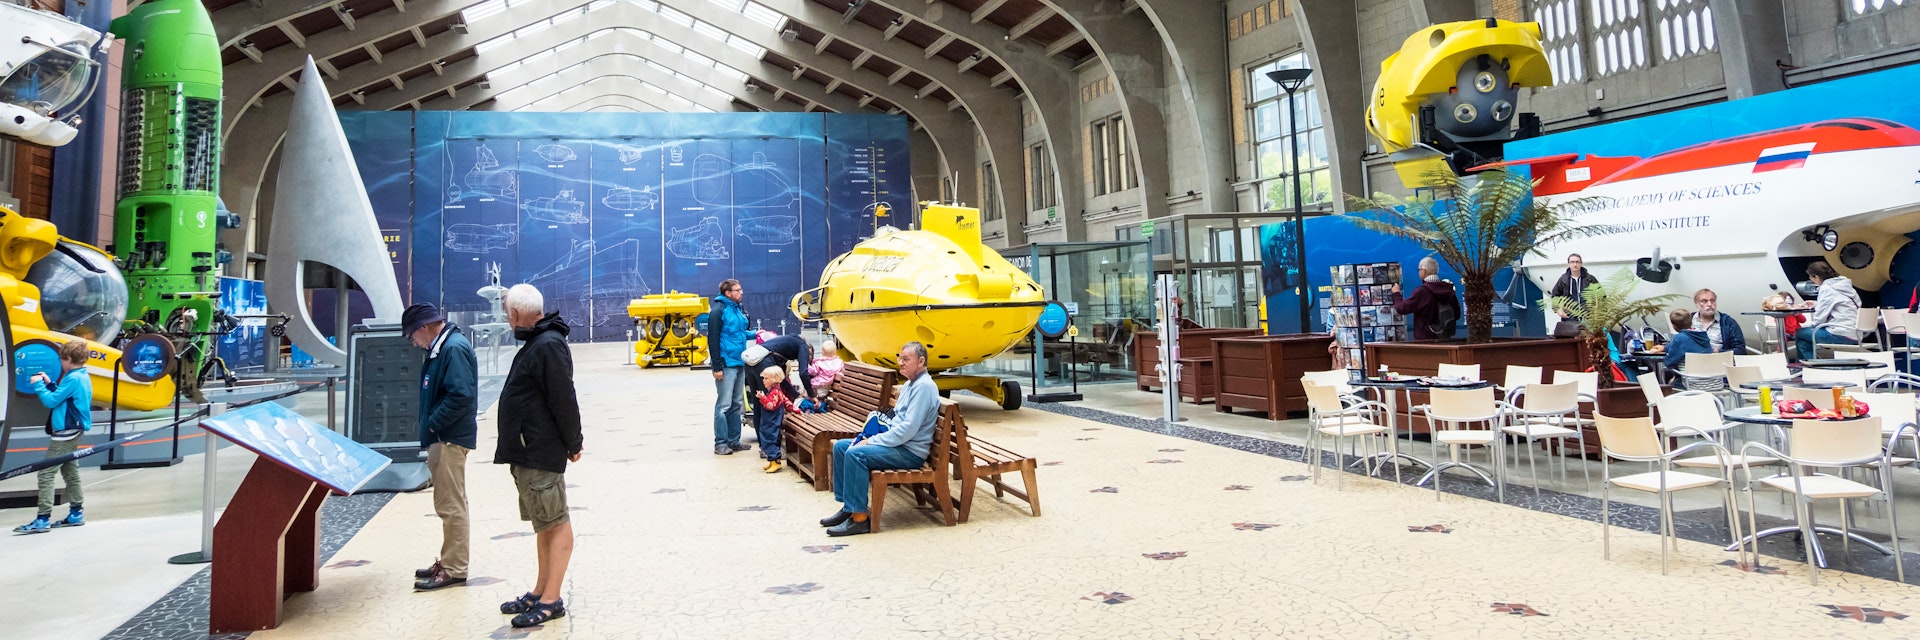 The Great Hall with famous bathyscaphes in the maritime museum La Cite de La Mer in Cherbourg, France.